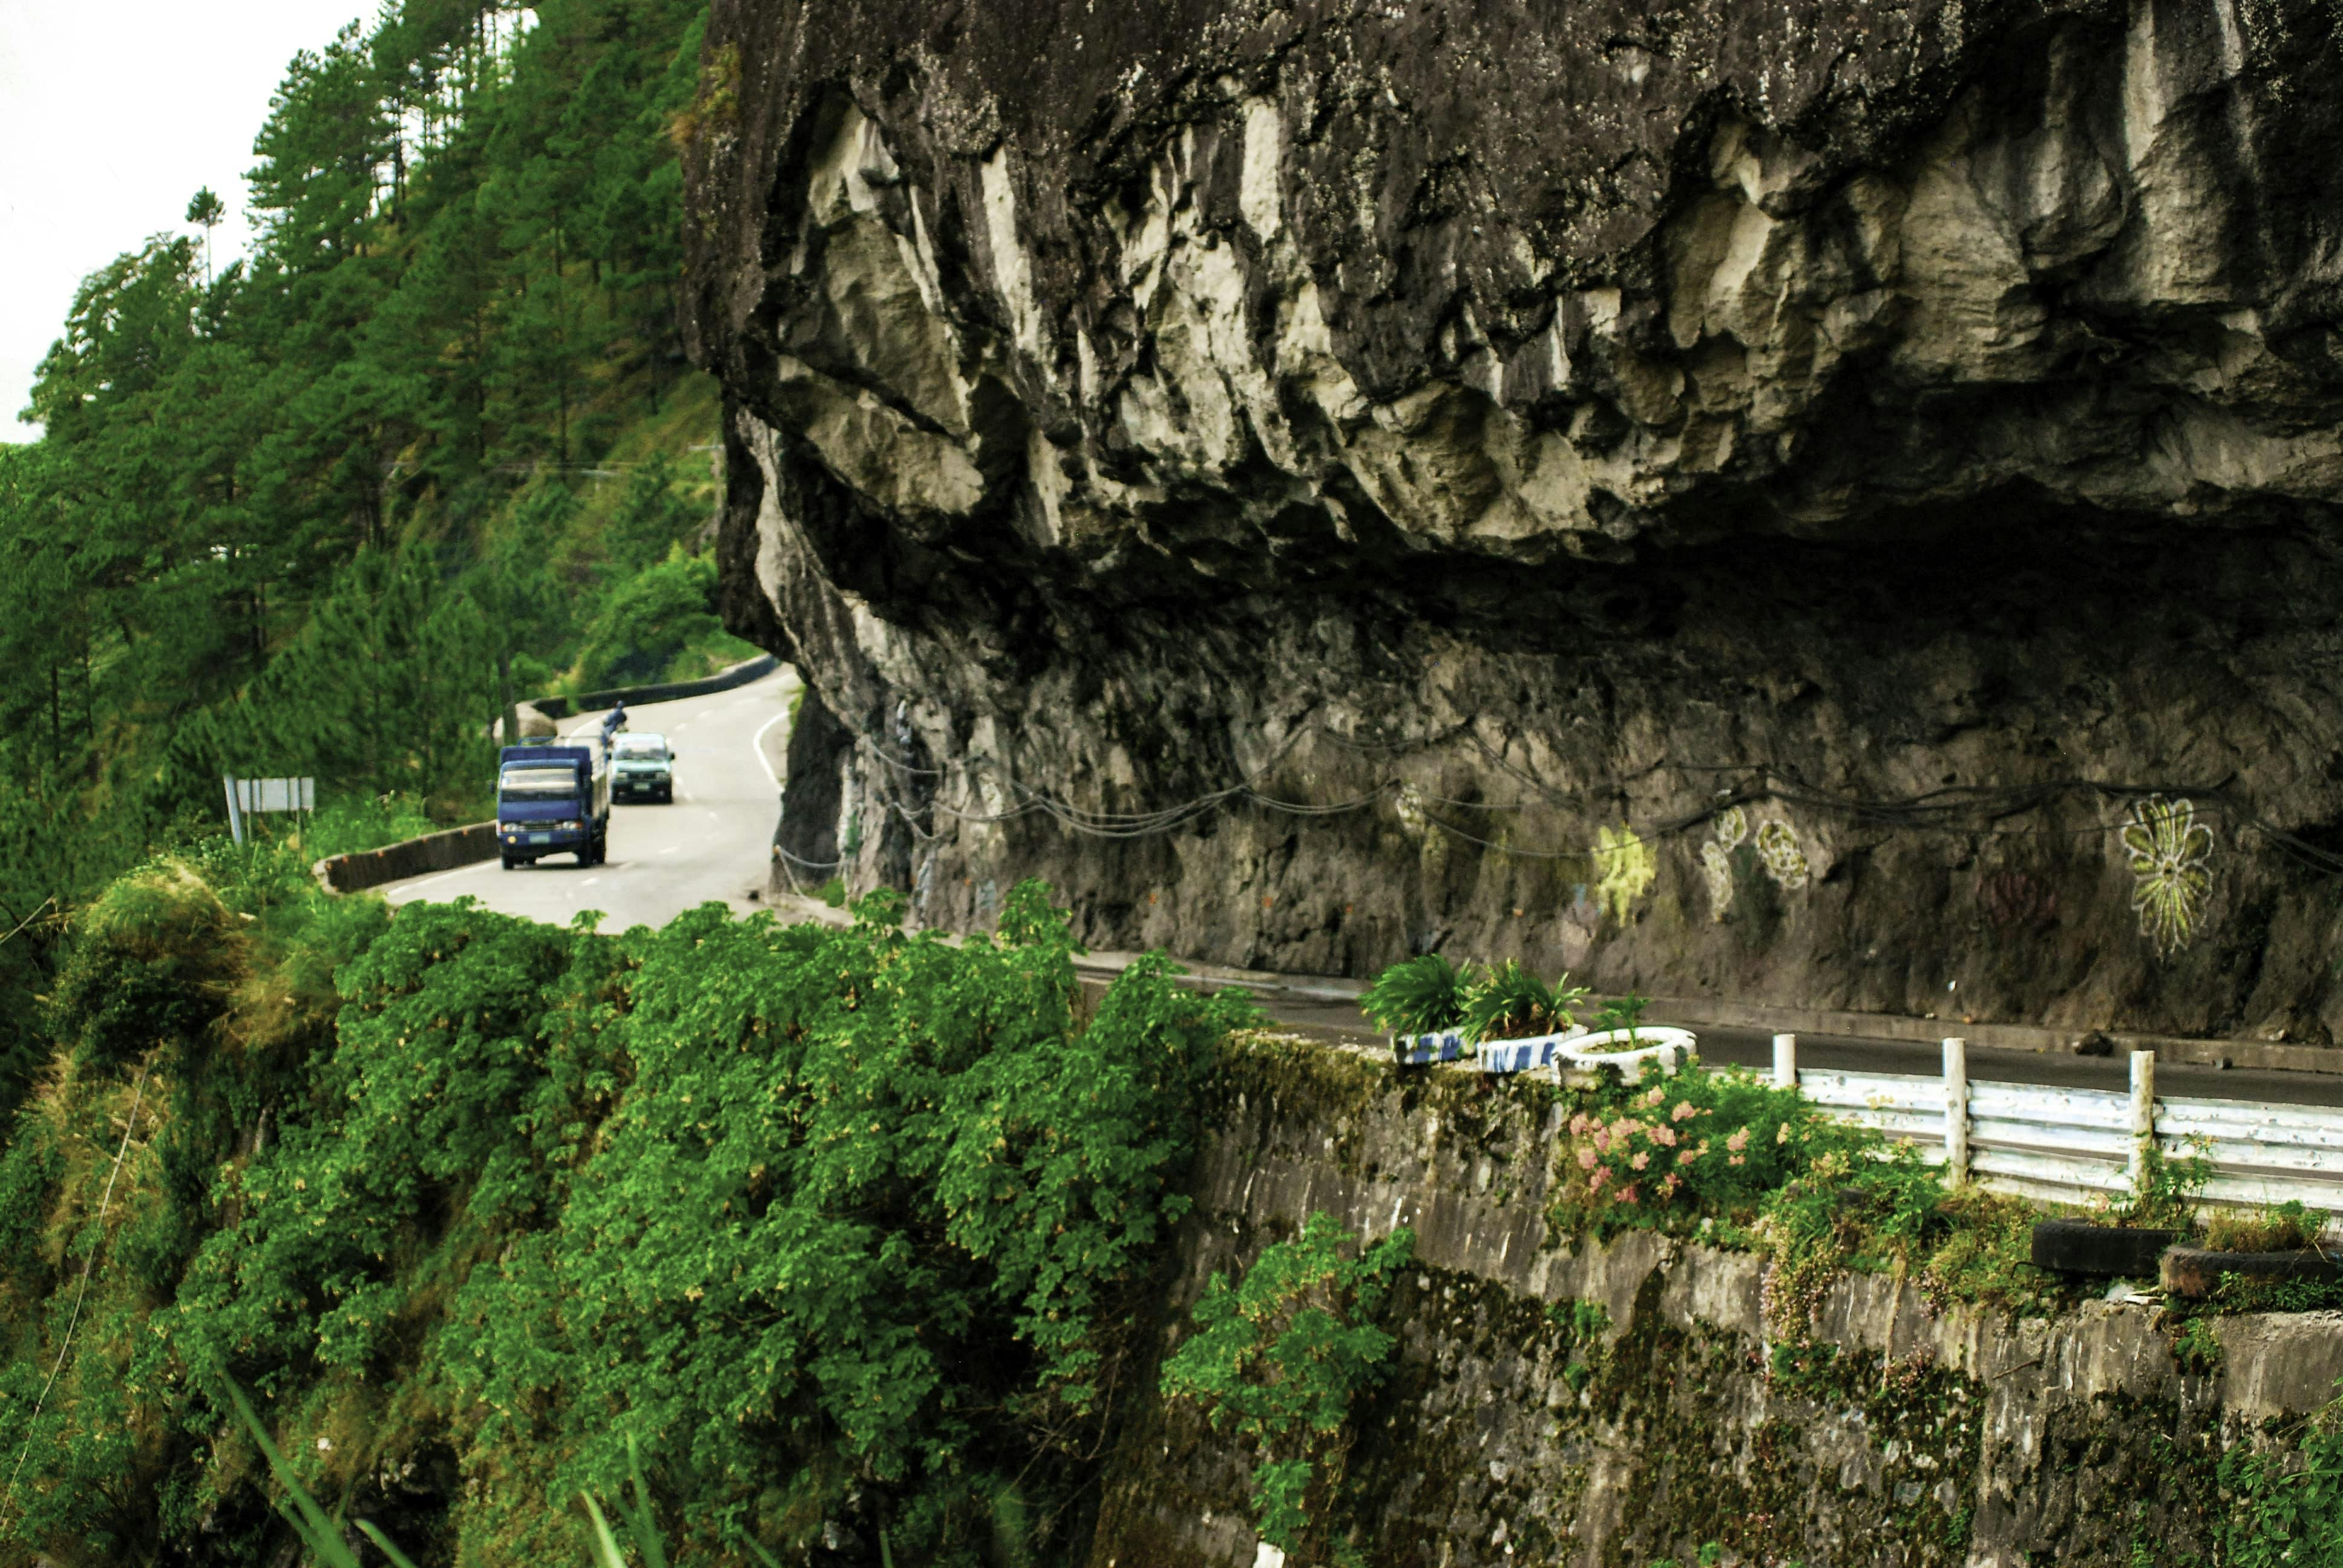 Halsema Highway, the second highest elevation in the Philippines